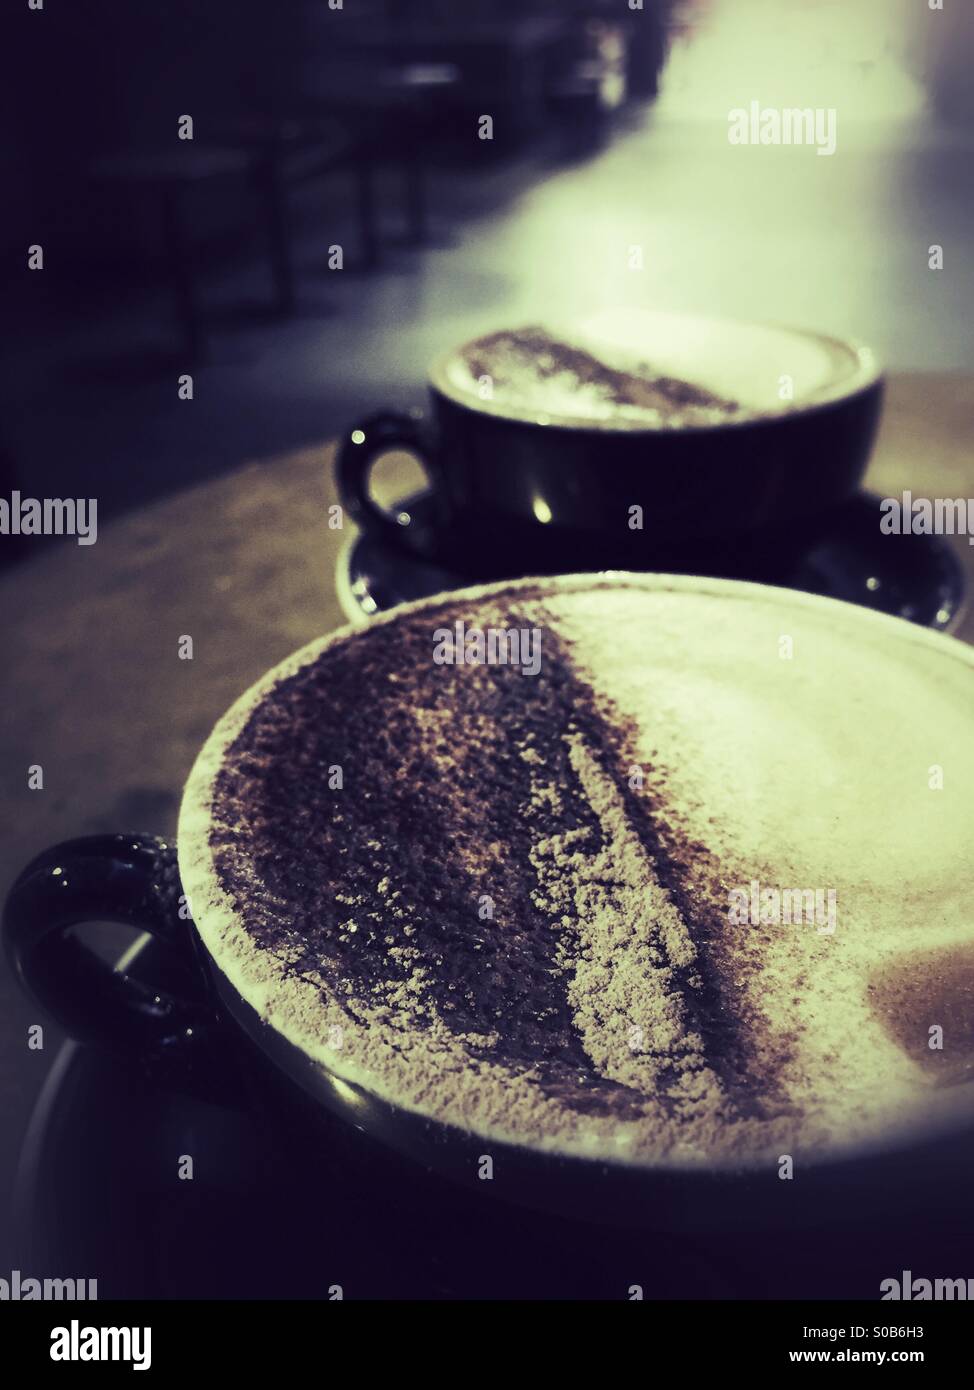 Two cappuccino coffees on table in cafe Stock Photo